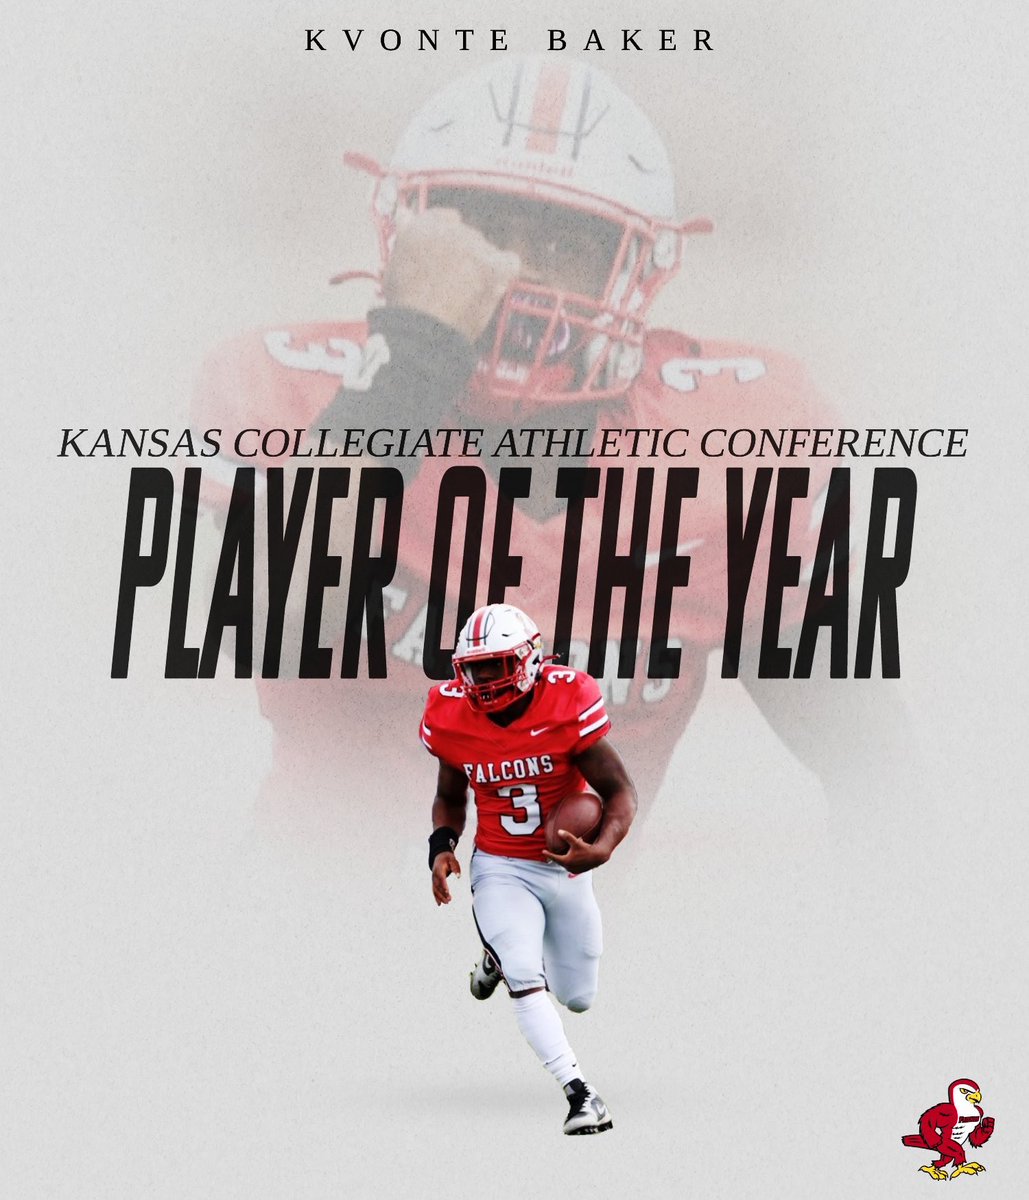 are we even surprised? 
K’Vonte Baker KCAC PLAYER OF THE YEAR!
#BTF #playeroftheyear